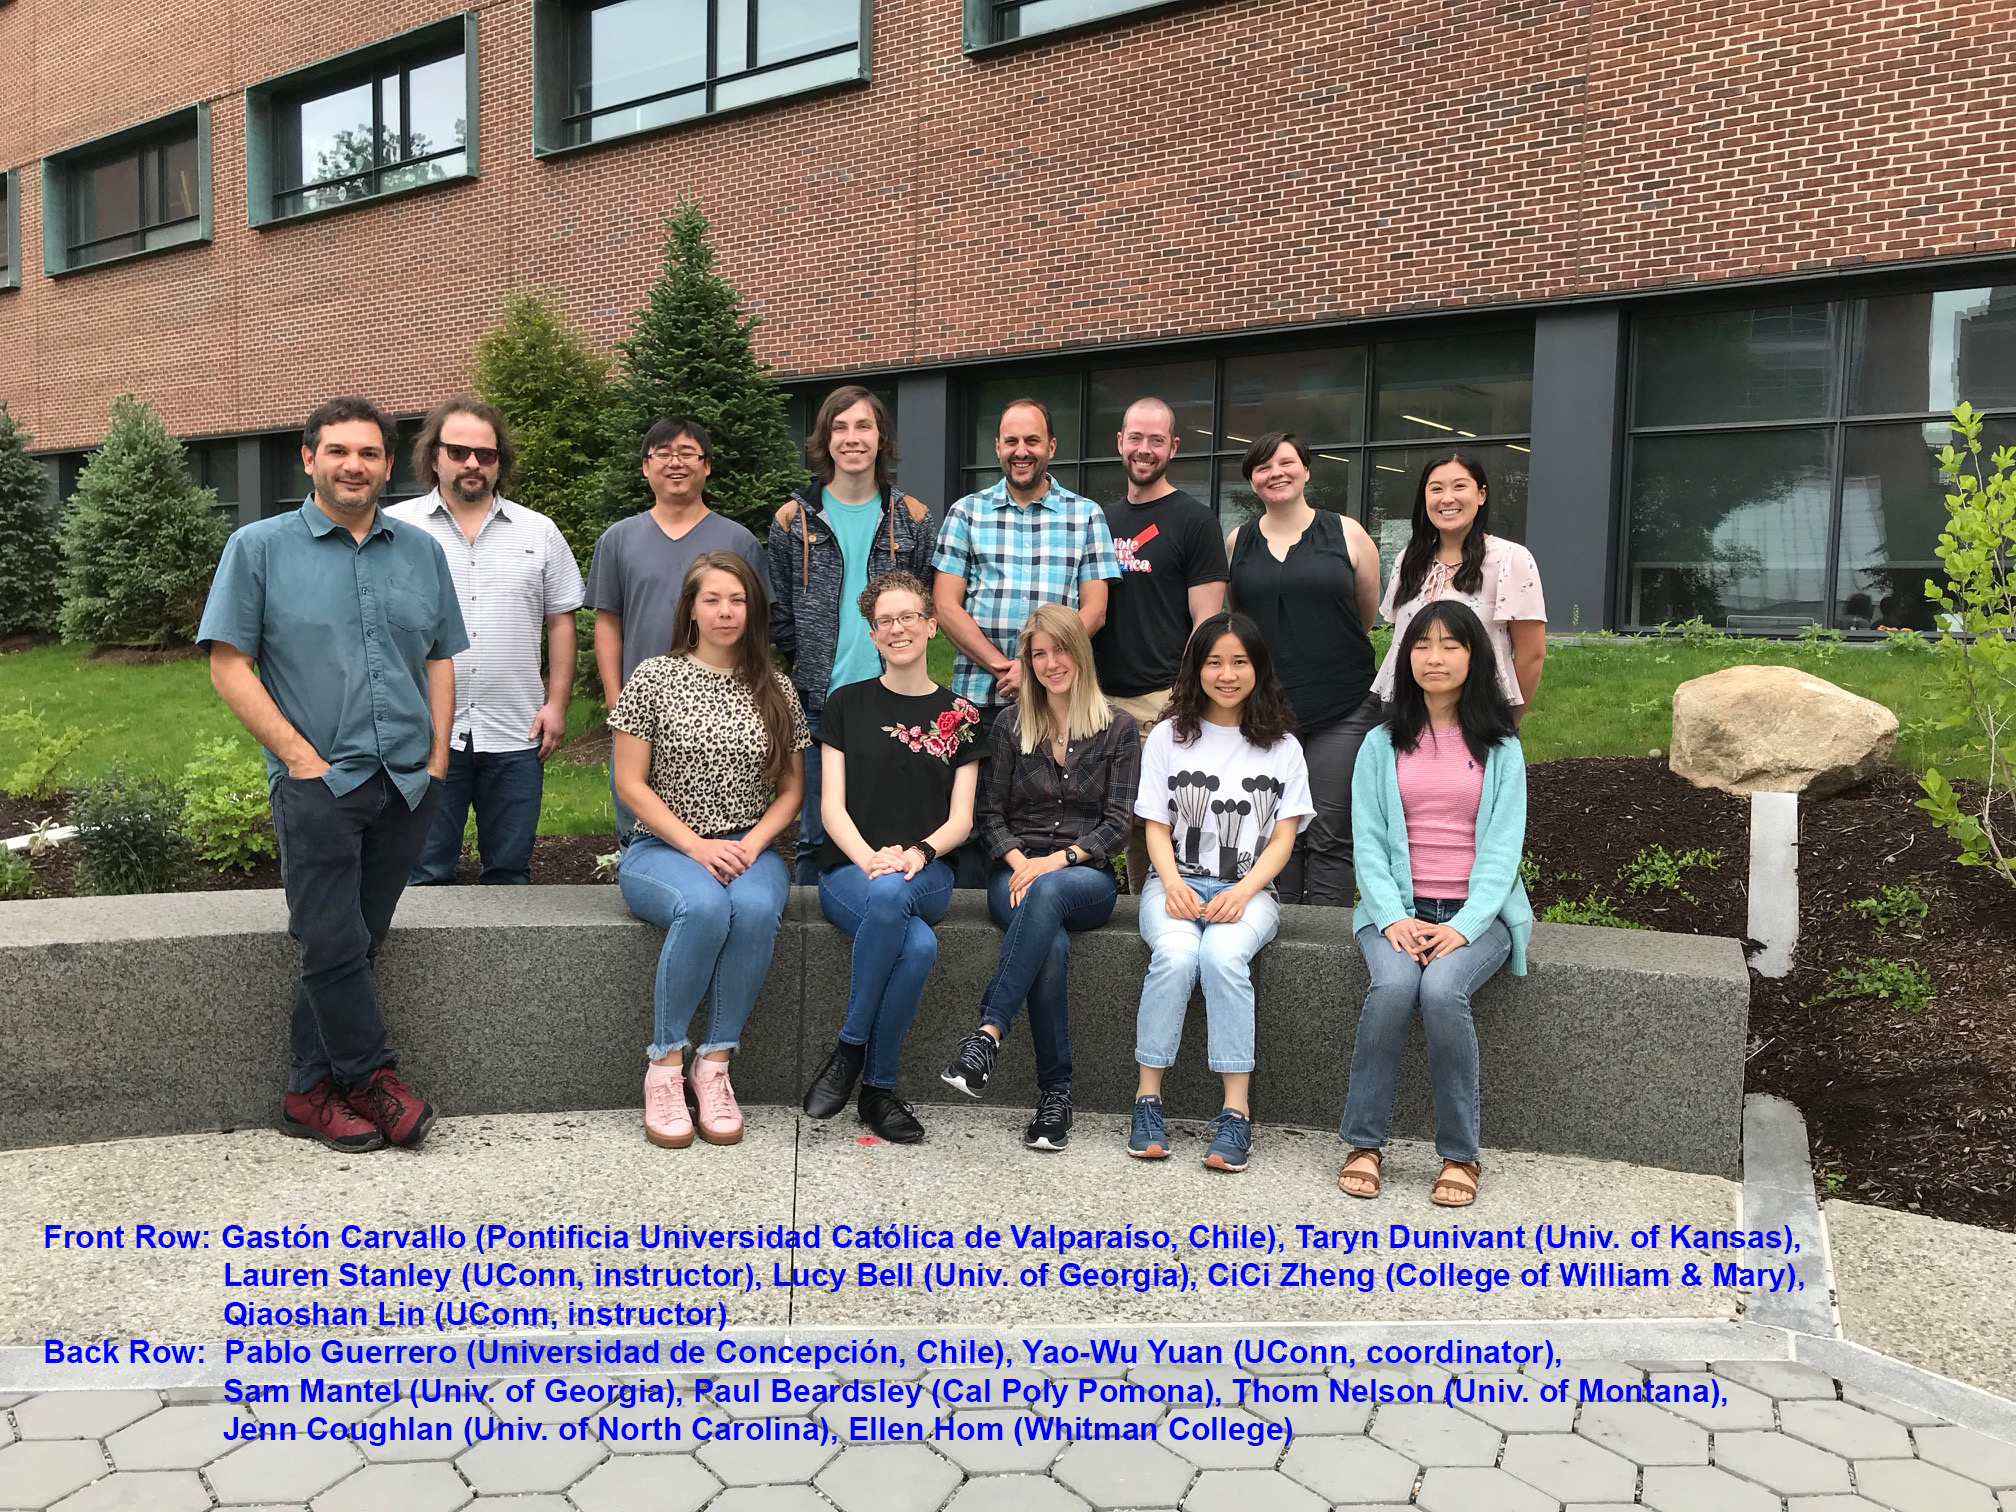 2019: The first Mimulus Functional Genomics Short Course (Storrs, CT)